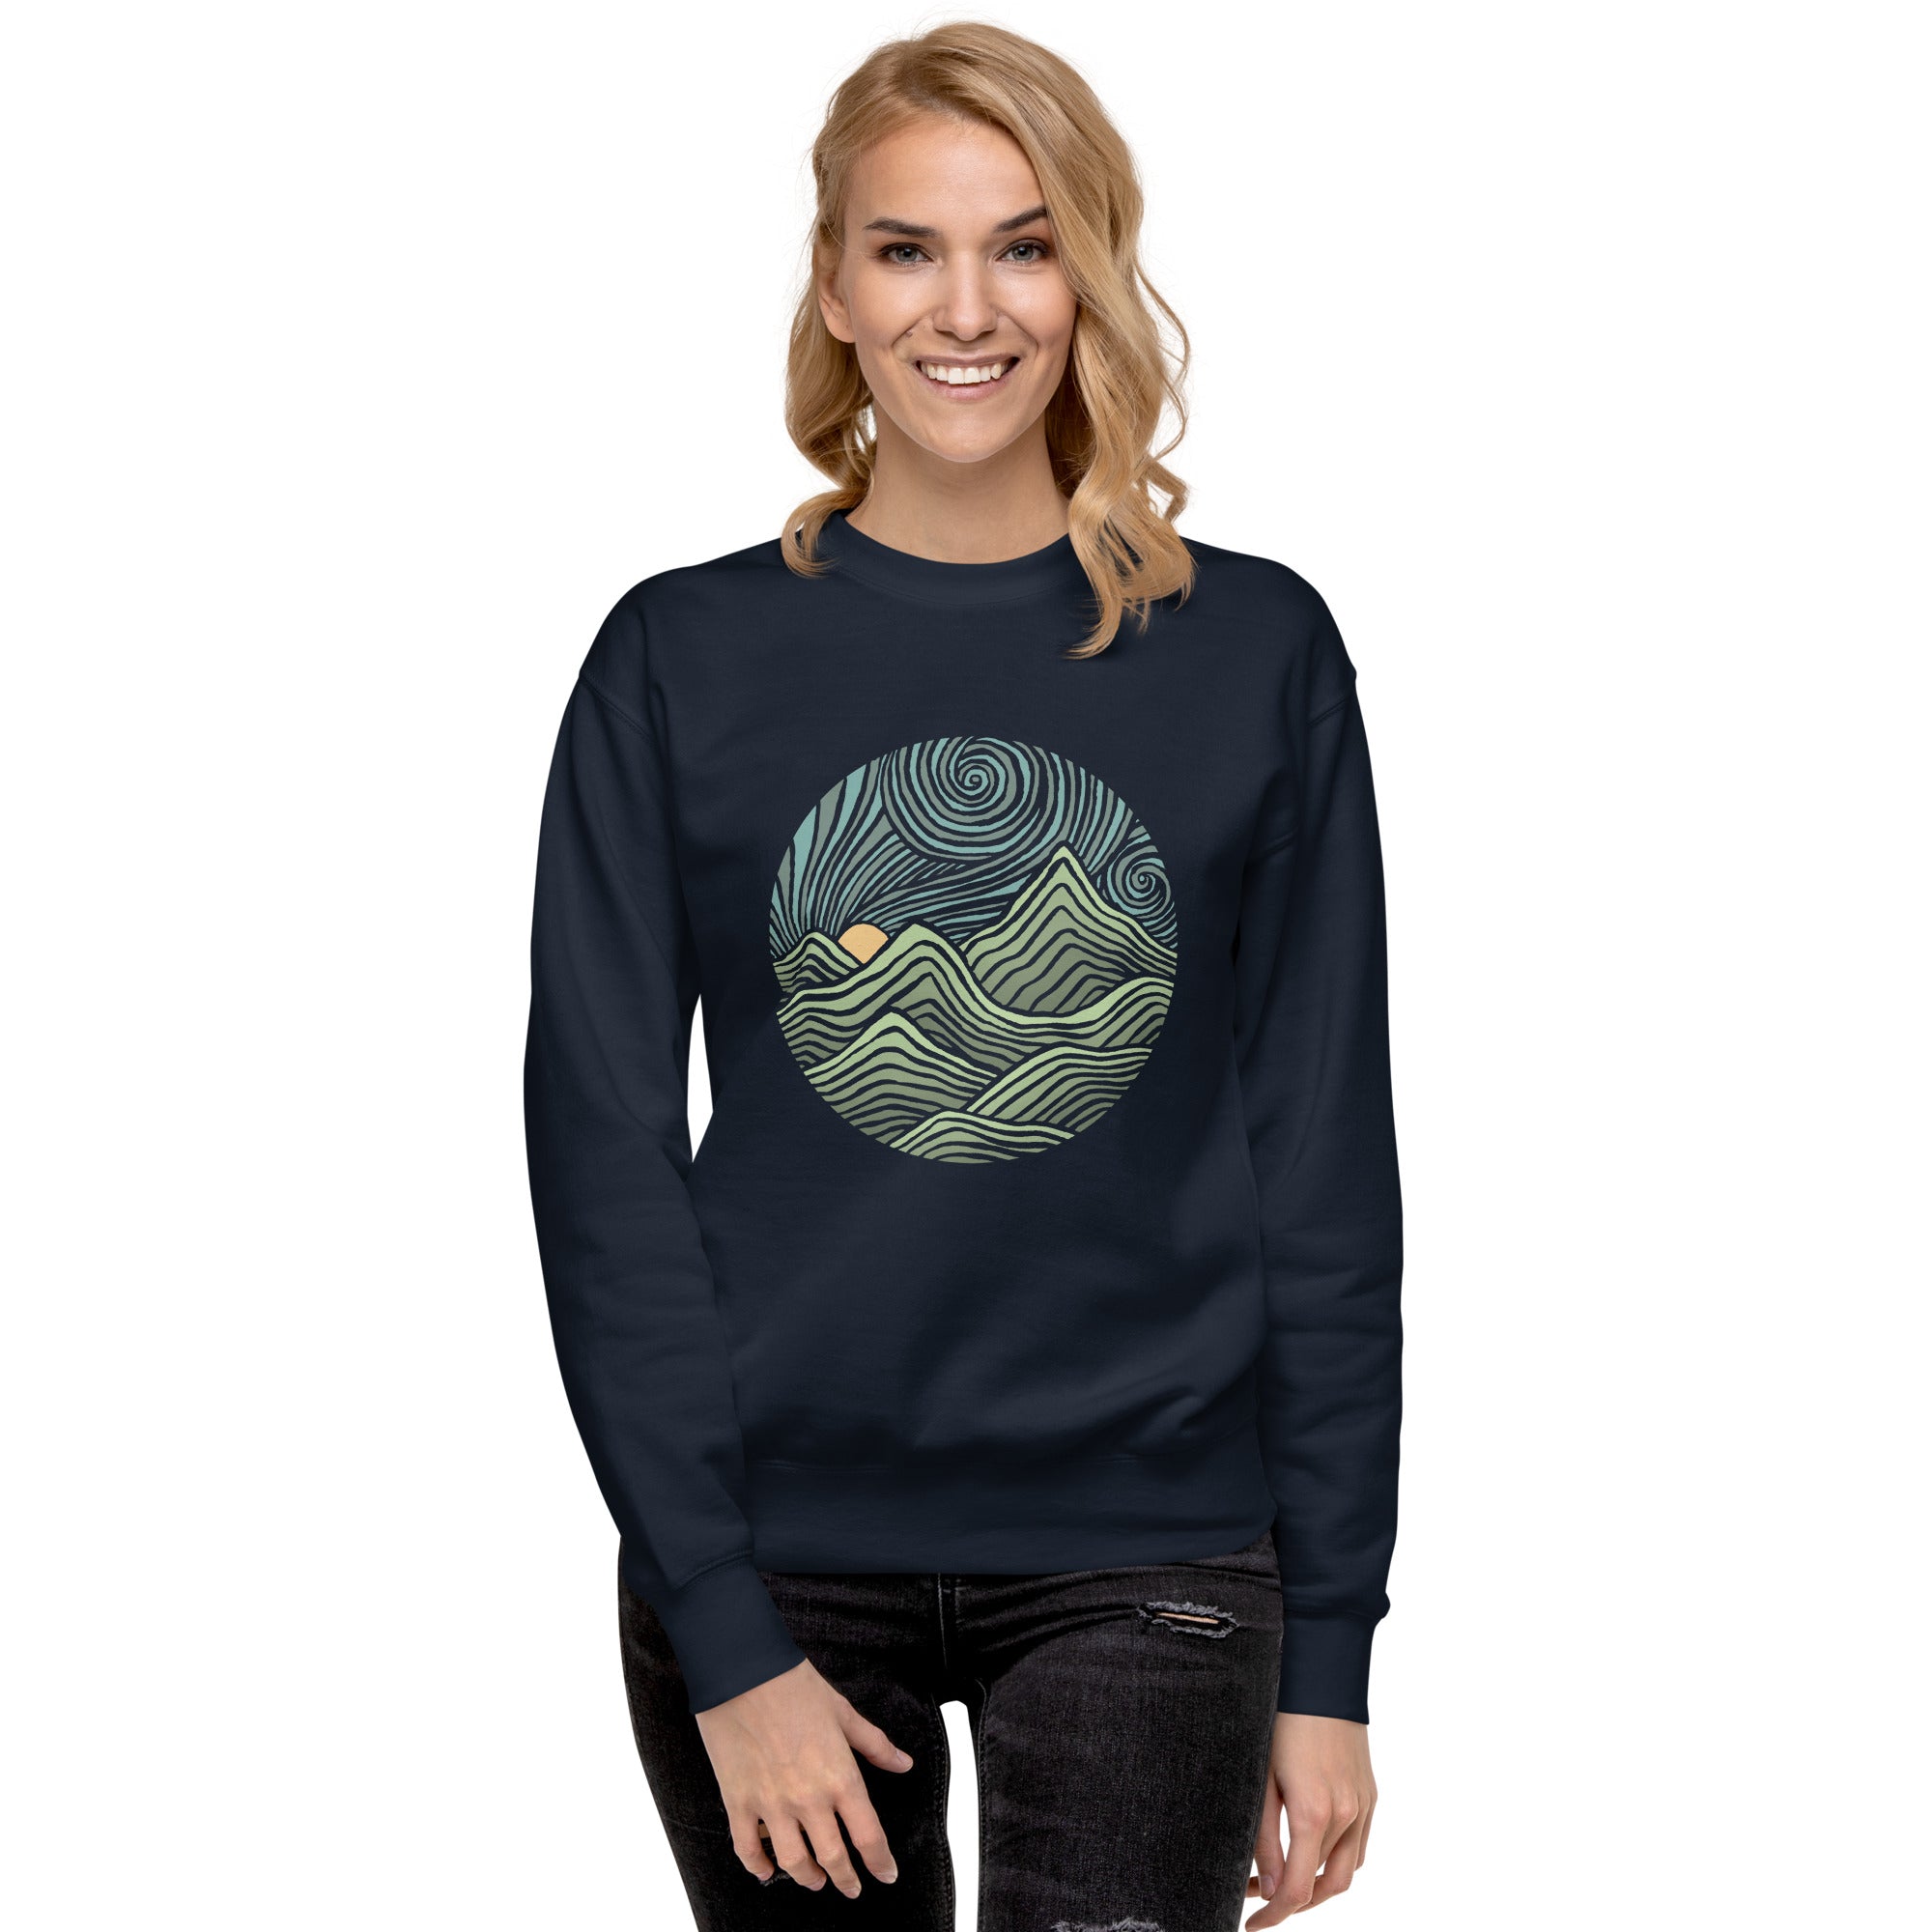 Swirly Mountains | Design By Dylan Fant Cool Classic Sweatshirt | Vintage Nature Fleece On Model | Solid Threads